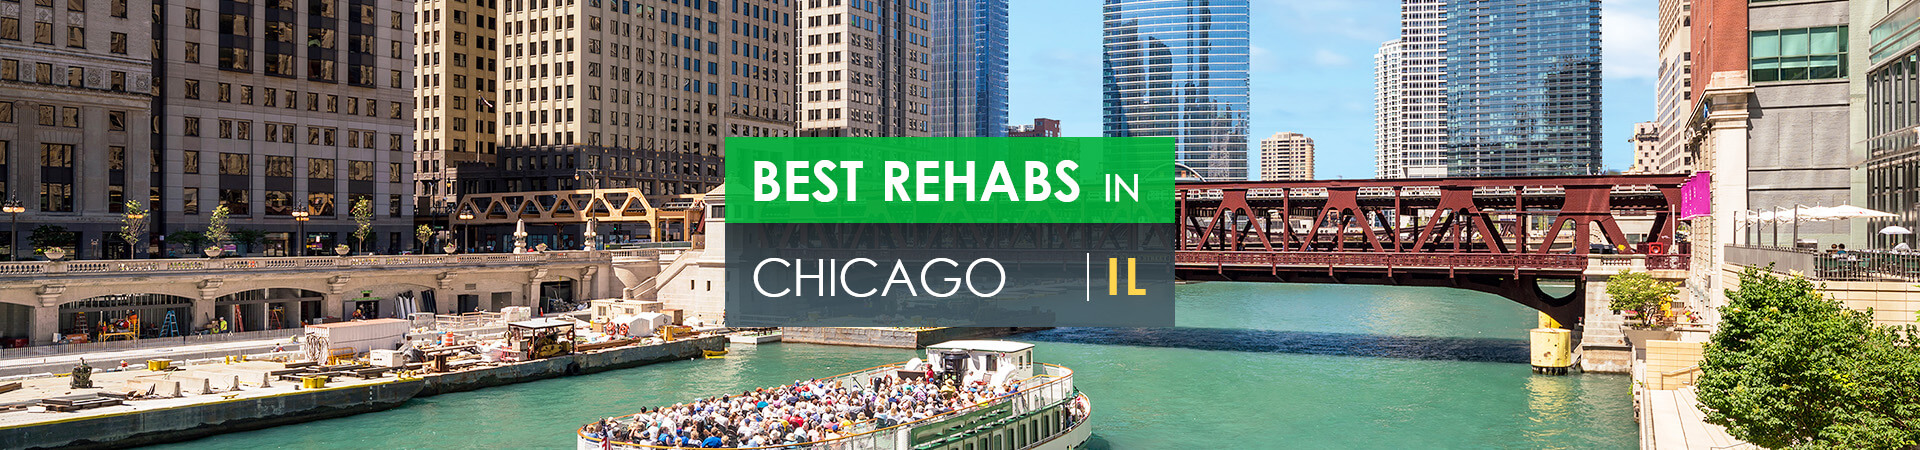 Best rehabs in Chicago, IL